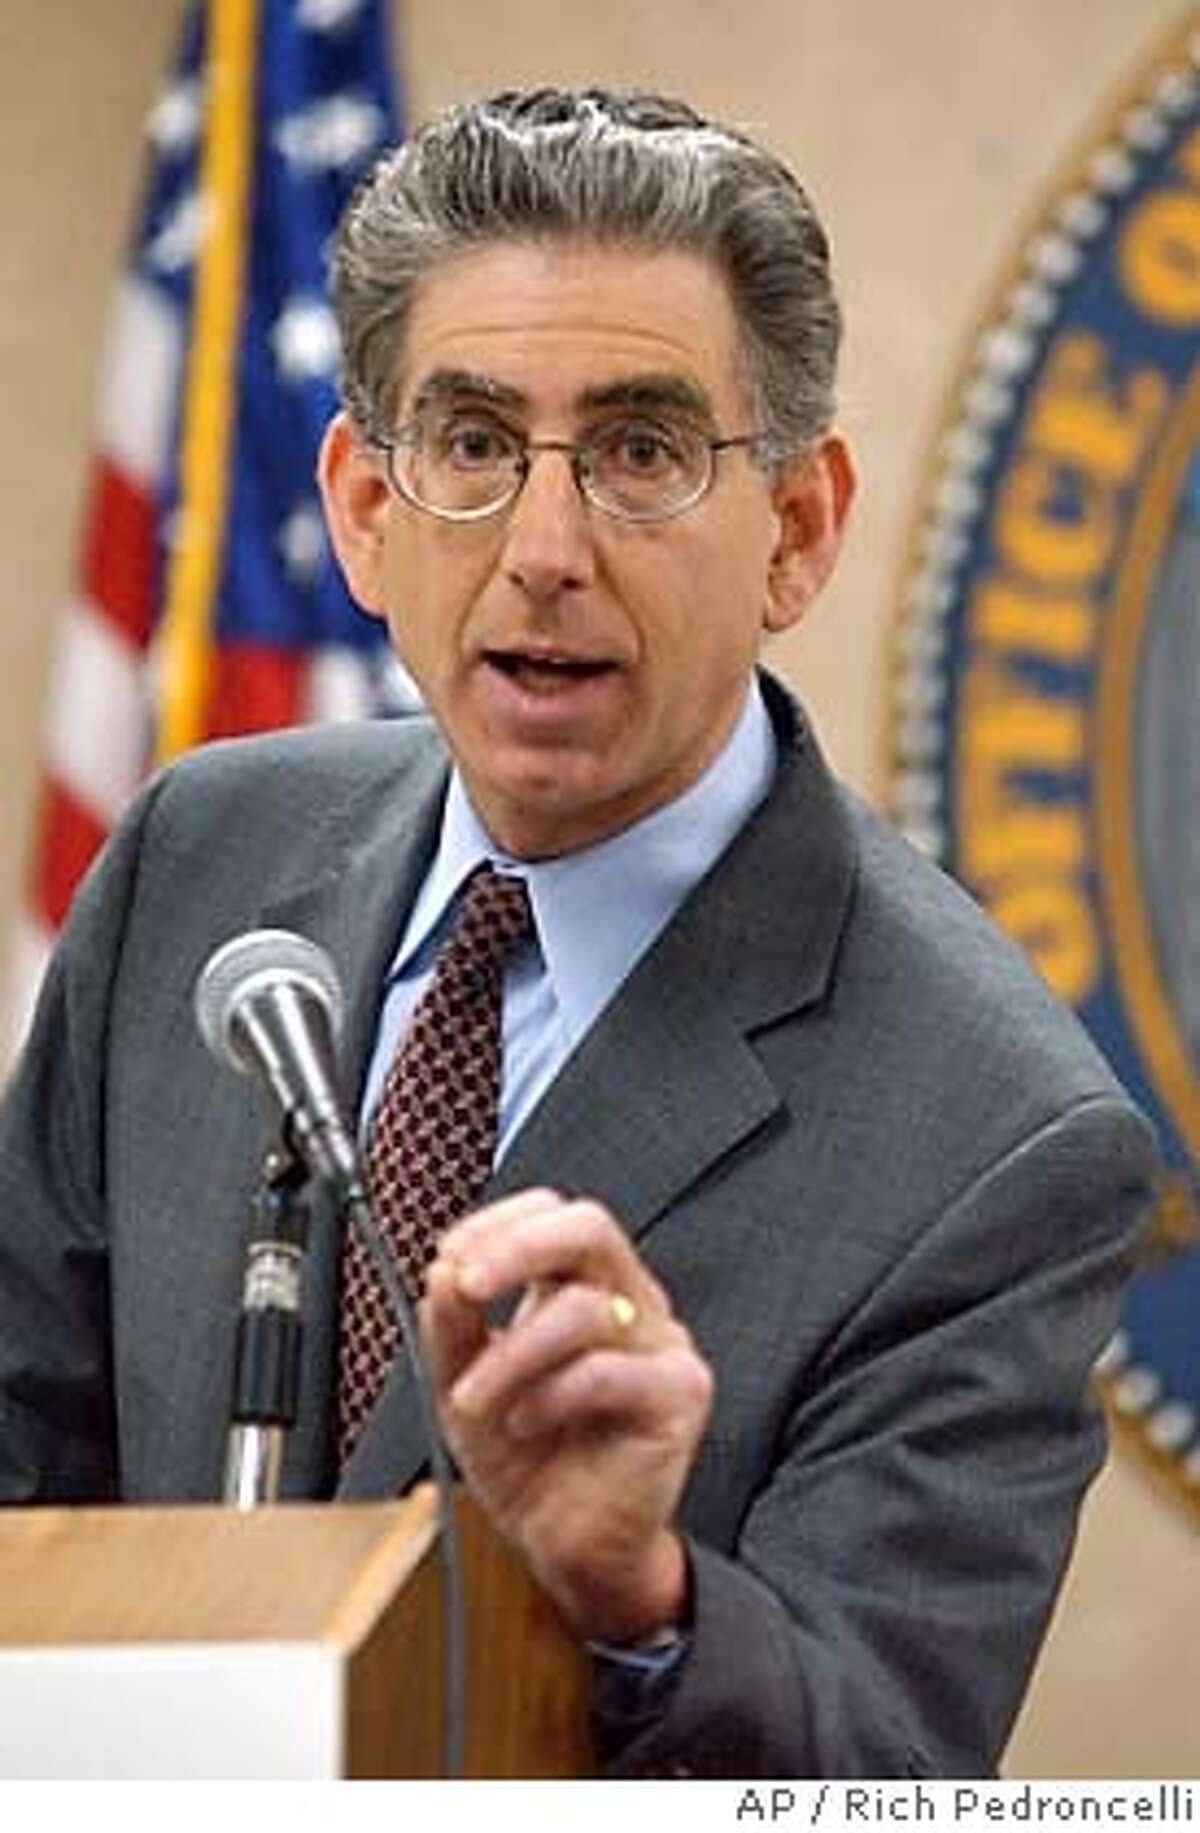 Treasuer Phil Angelides gestures as he discusses his backup plan to keep the state solvent if voters reject a $15 billion bond measure, during a news conference held in Sacramento, Calif., Thursday, Feb. 19, 2004. Worried that voters might turn down Gov. Arnold Schwarzenegger's Proposition 57 on the March ballot, Angelides unveiled his contingency plan that would raise income taxes on the highest-earning Californians and take out short-term loans from wall street investors.(AP Photo/Rich Pedroncelli) ALSO RAN: 03/22/2004 Treasurer Phil Angelides says a backup plan is needed if a $15 billion bond measure fails. ProductNameChronicle ProductNameChronicle Ran on: 11-10-2004 State Treasurer Phil Angelides says four firms overpay their executives. Ran on: 12-01-2004 Harrigan Ran on: 12-07-2004 Treasurer Phil Angelides, shown here in February, praised a recent partnership that lets Silicon Valley business leaders advise small to medium businesses. #######0421629071